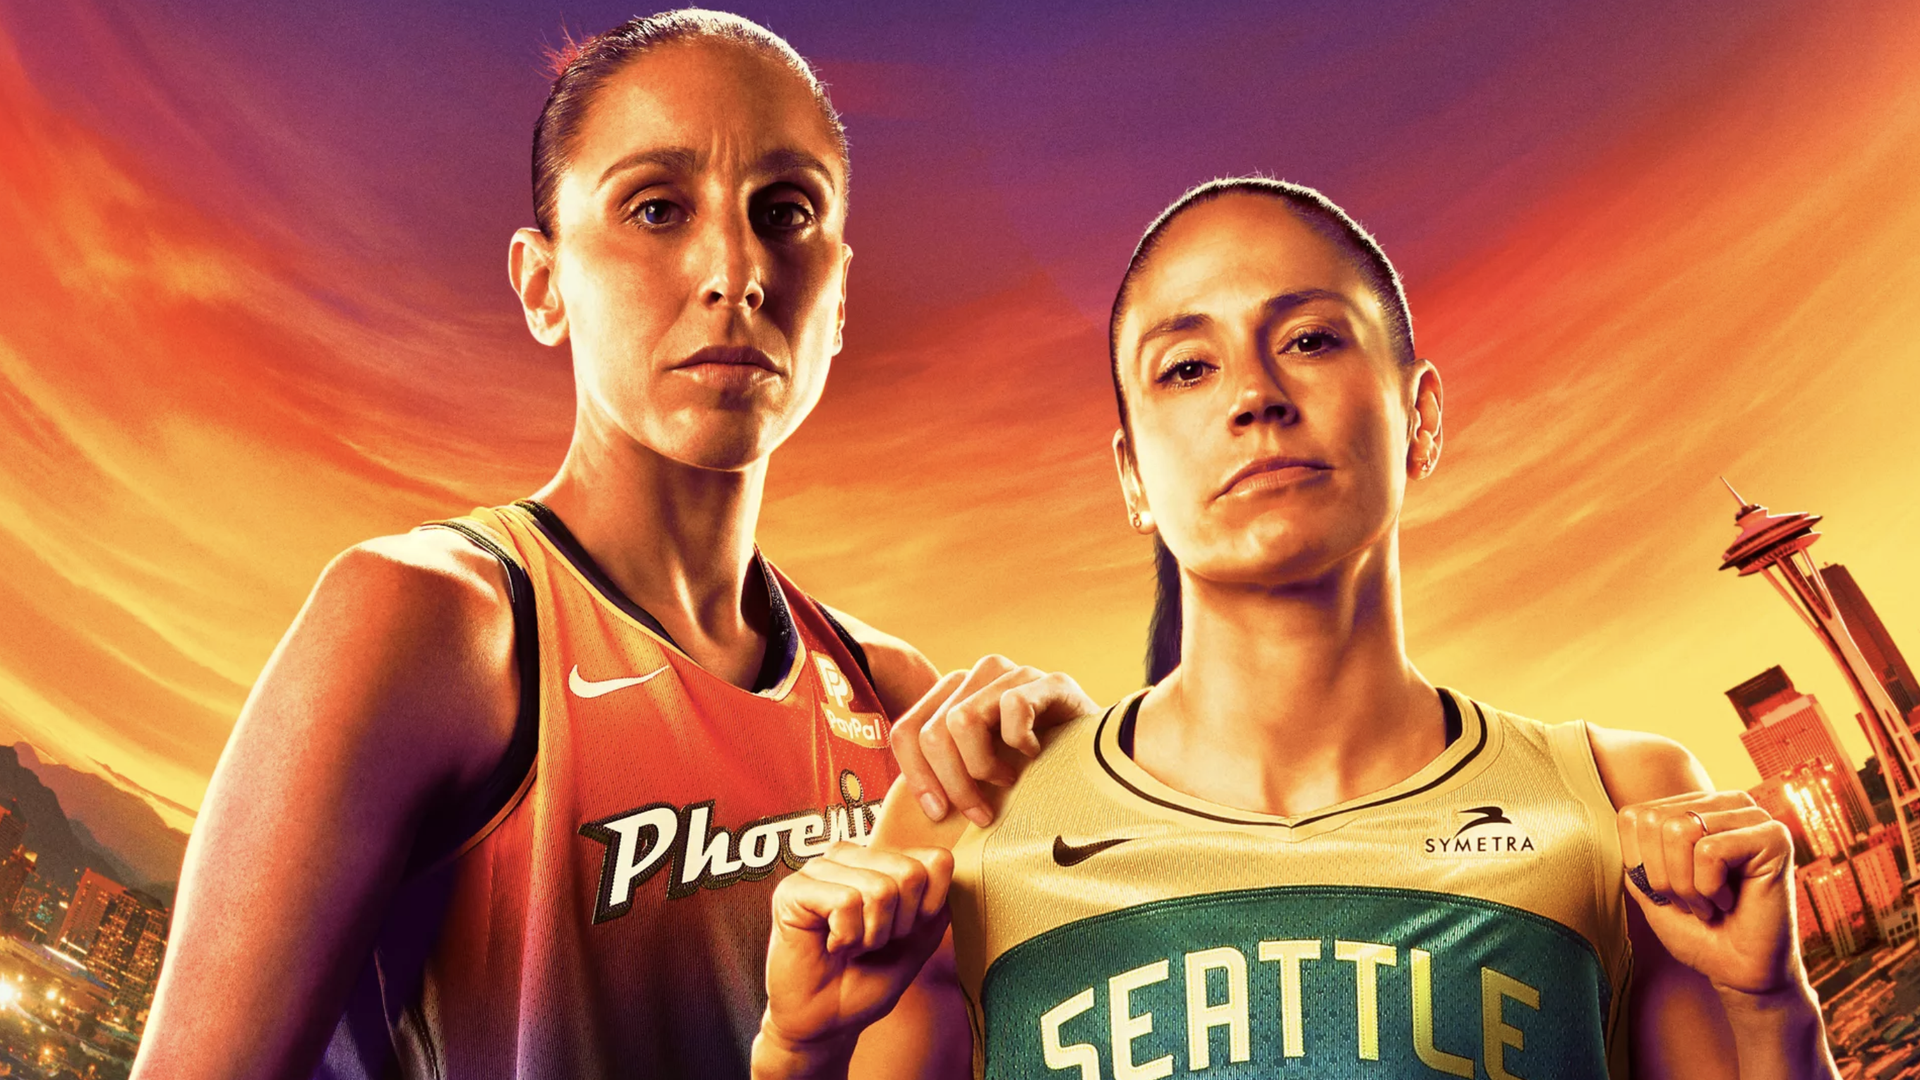 Photo of two female basketball players standing in front of an illustrated sunset